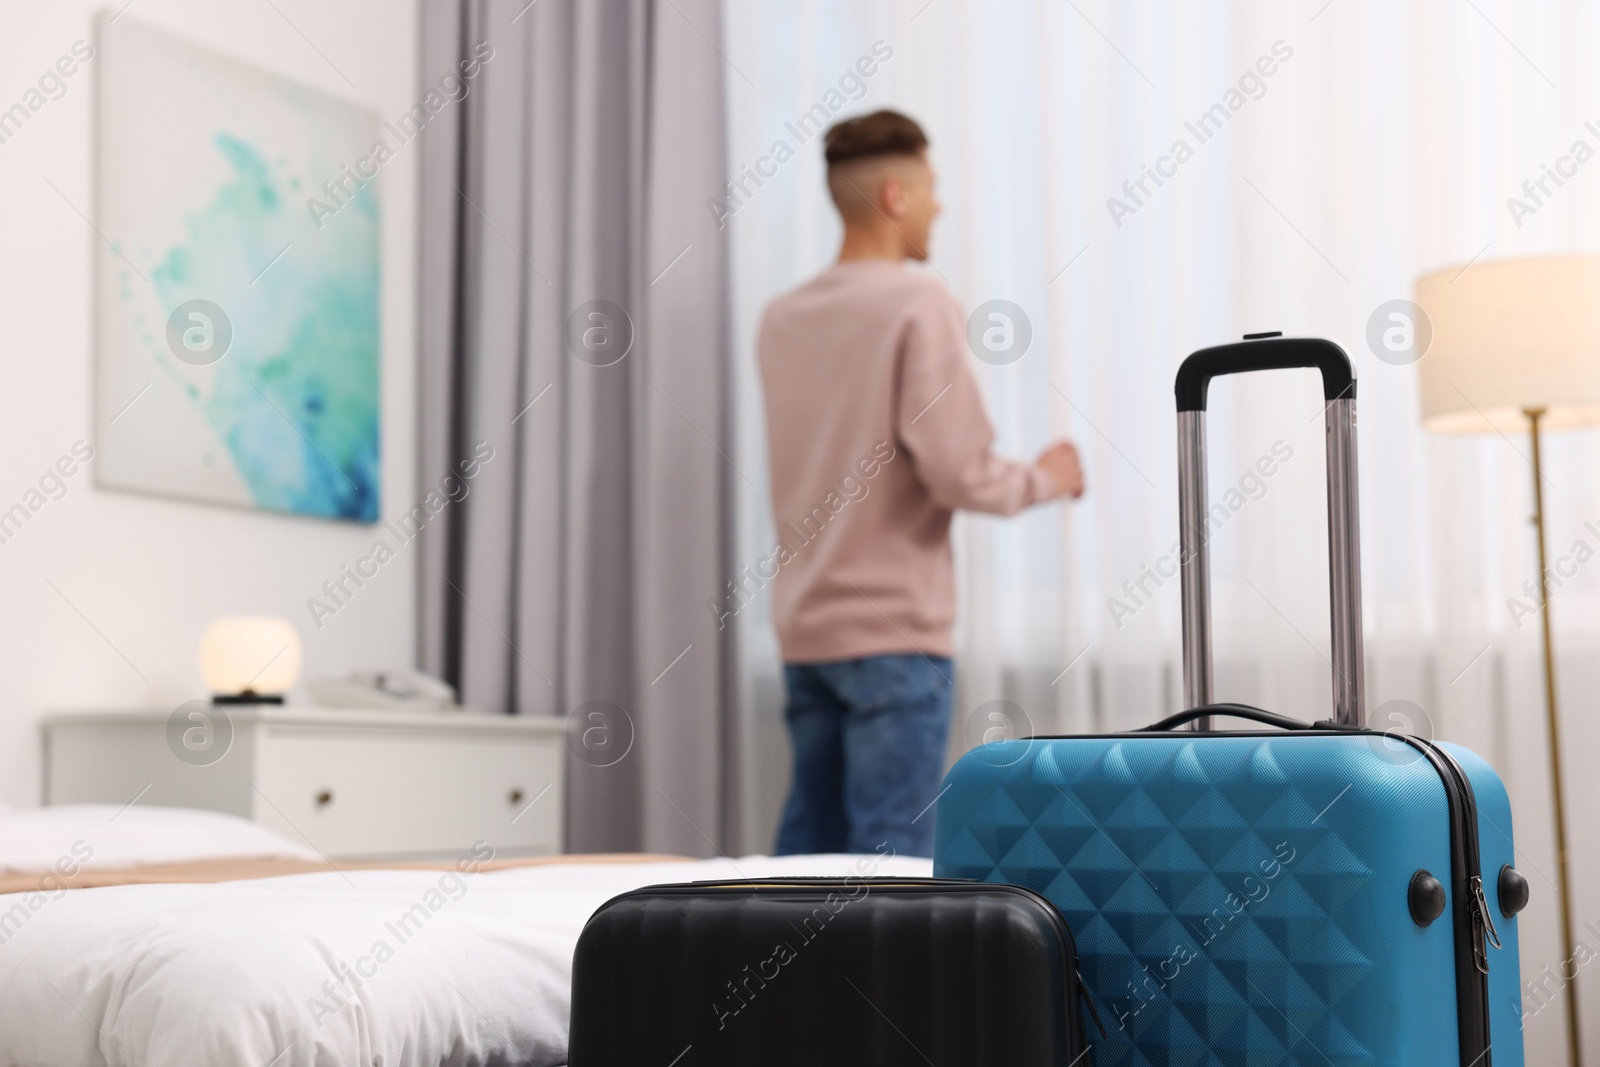 Photo of Guest opening curtains in stylish hotel room, focus on suitcases